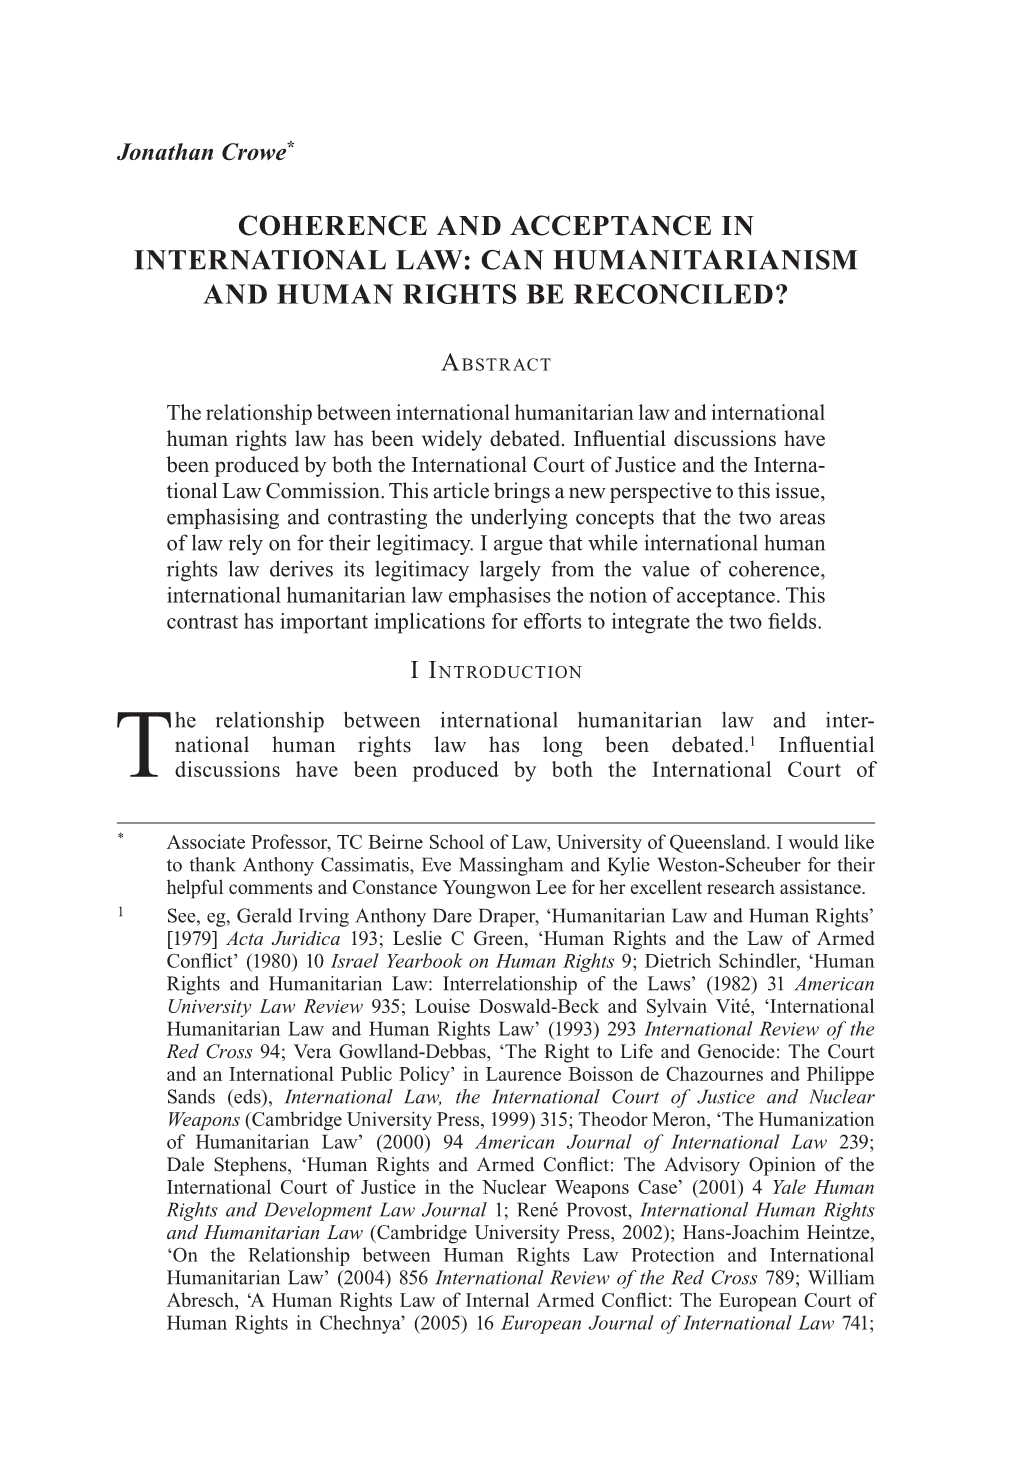 Coherence and Acceptance in International Law: Can Humanitarianism and Human Rights Be Reconciled?